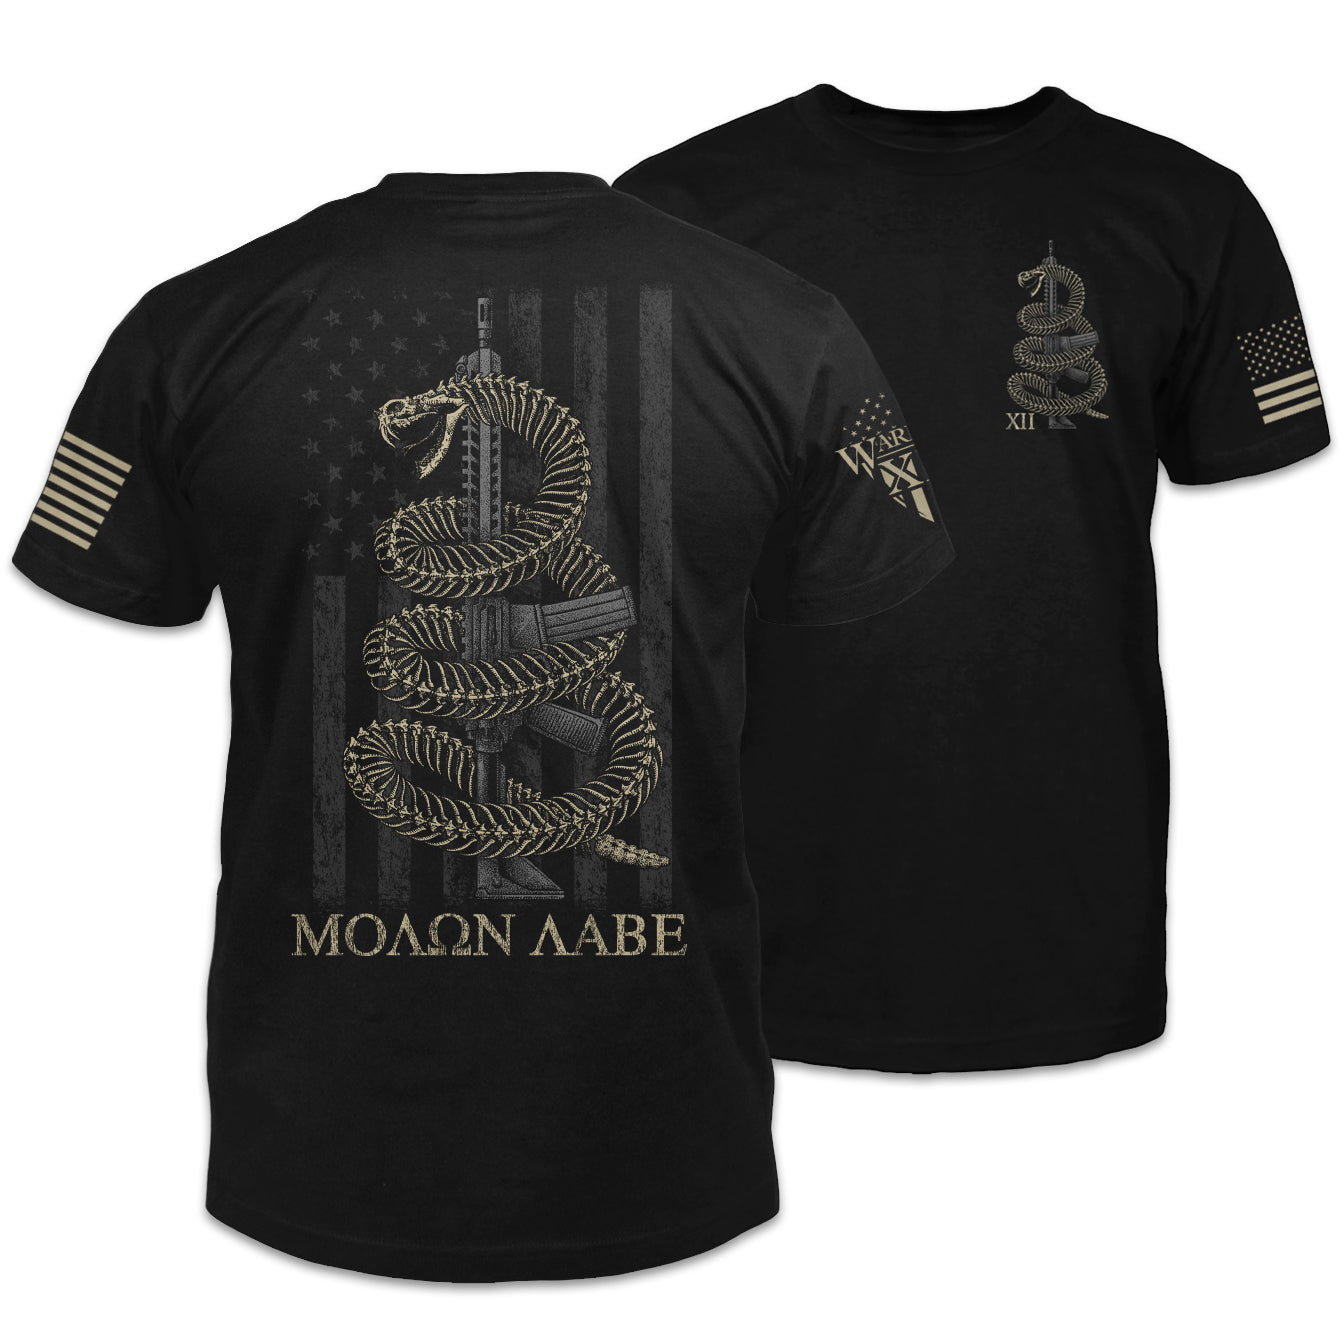 Front and back black t-shirt  features a coiled skeletal rattlesnake ready to defend an AR-15 printed on the shirt.